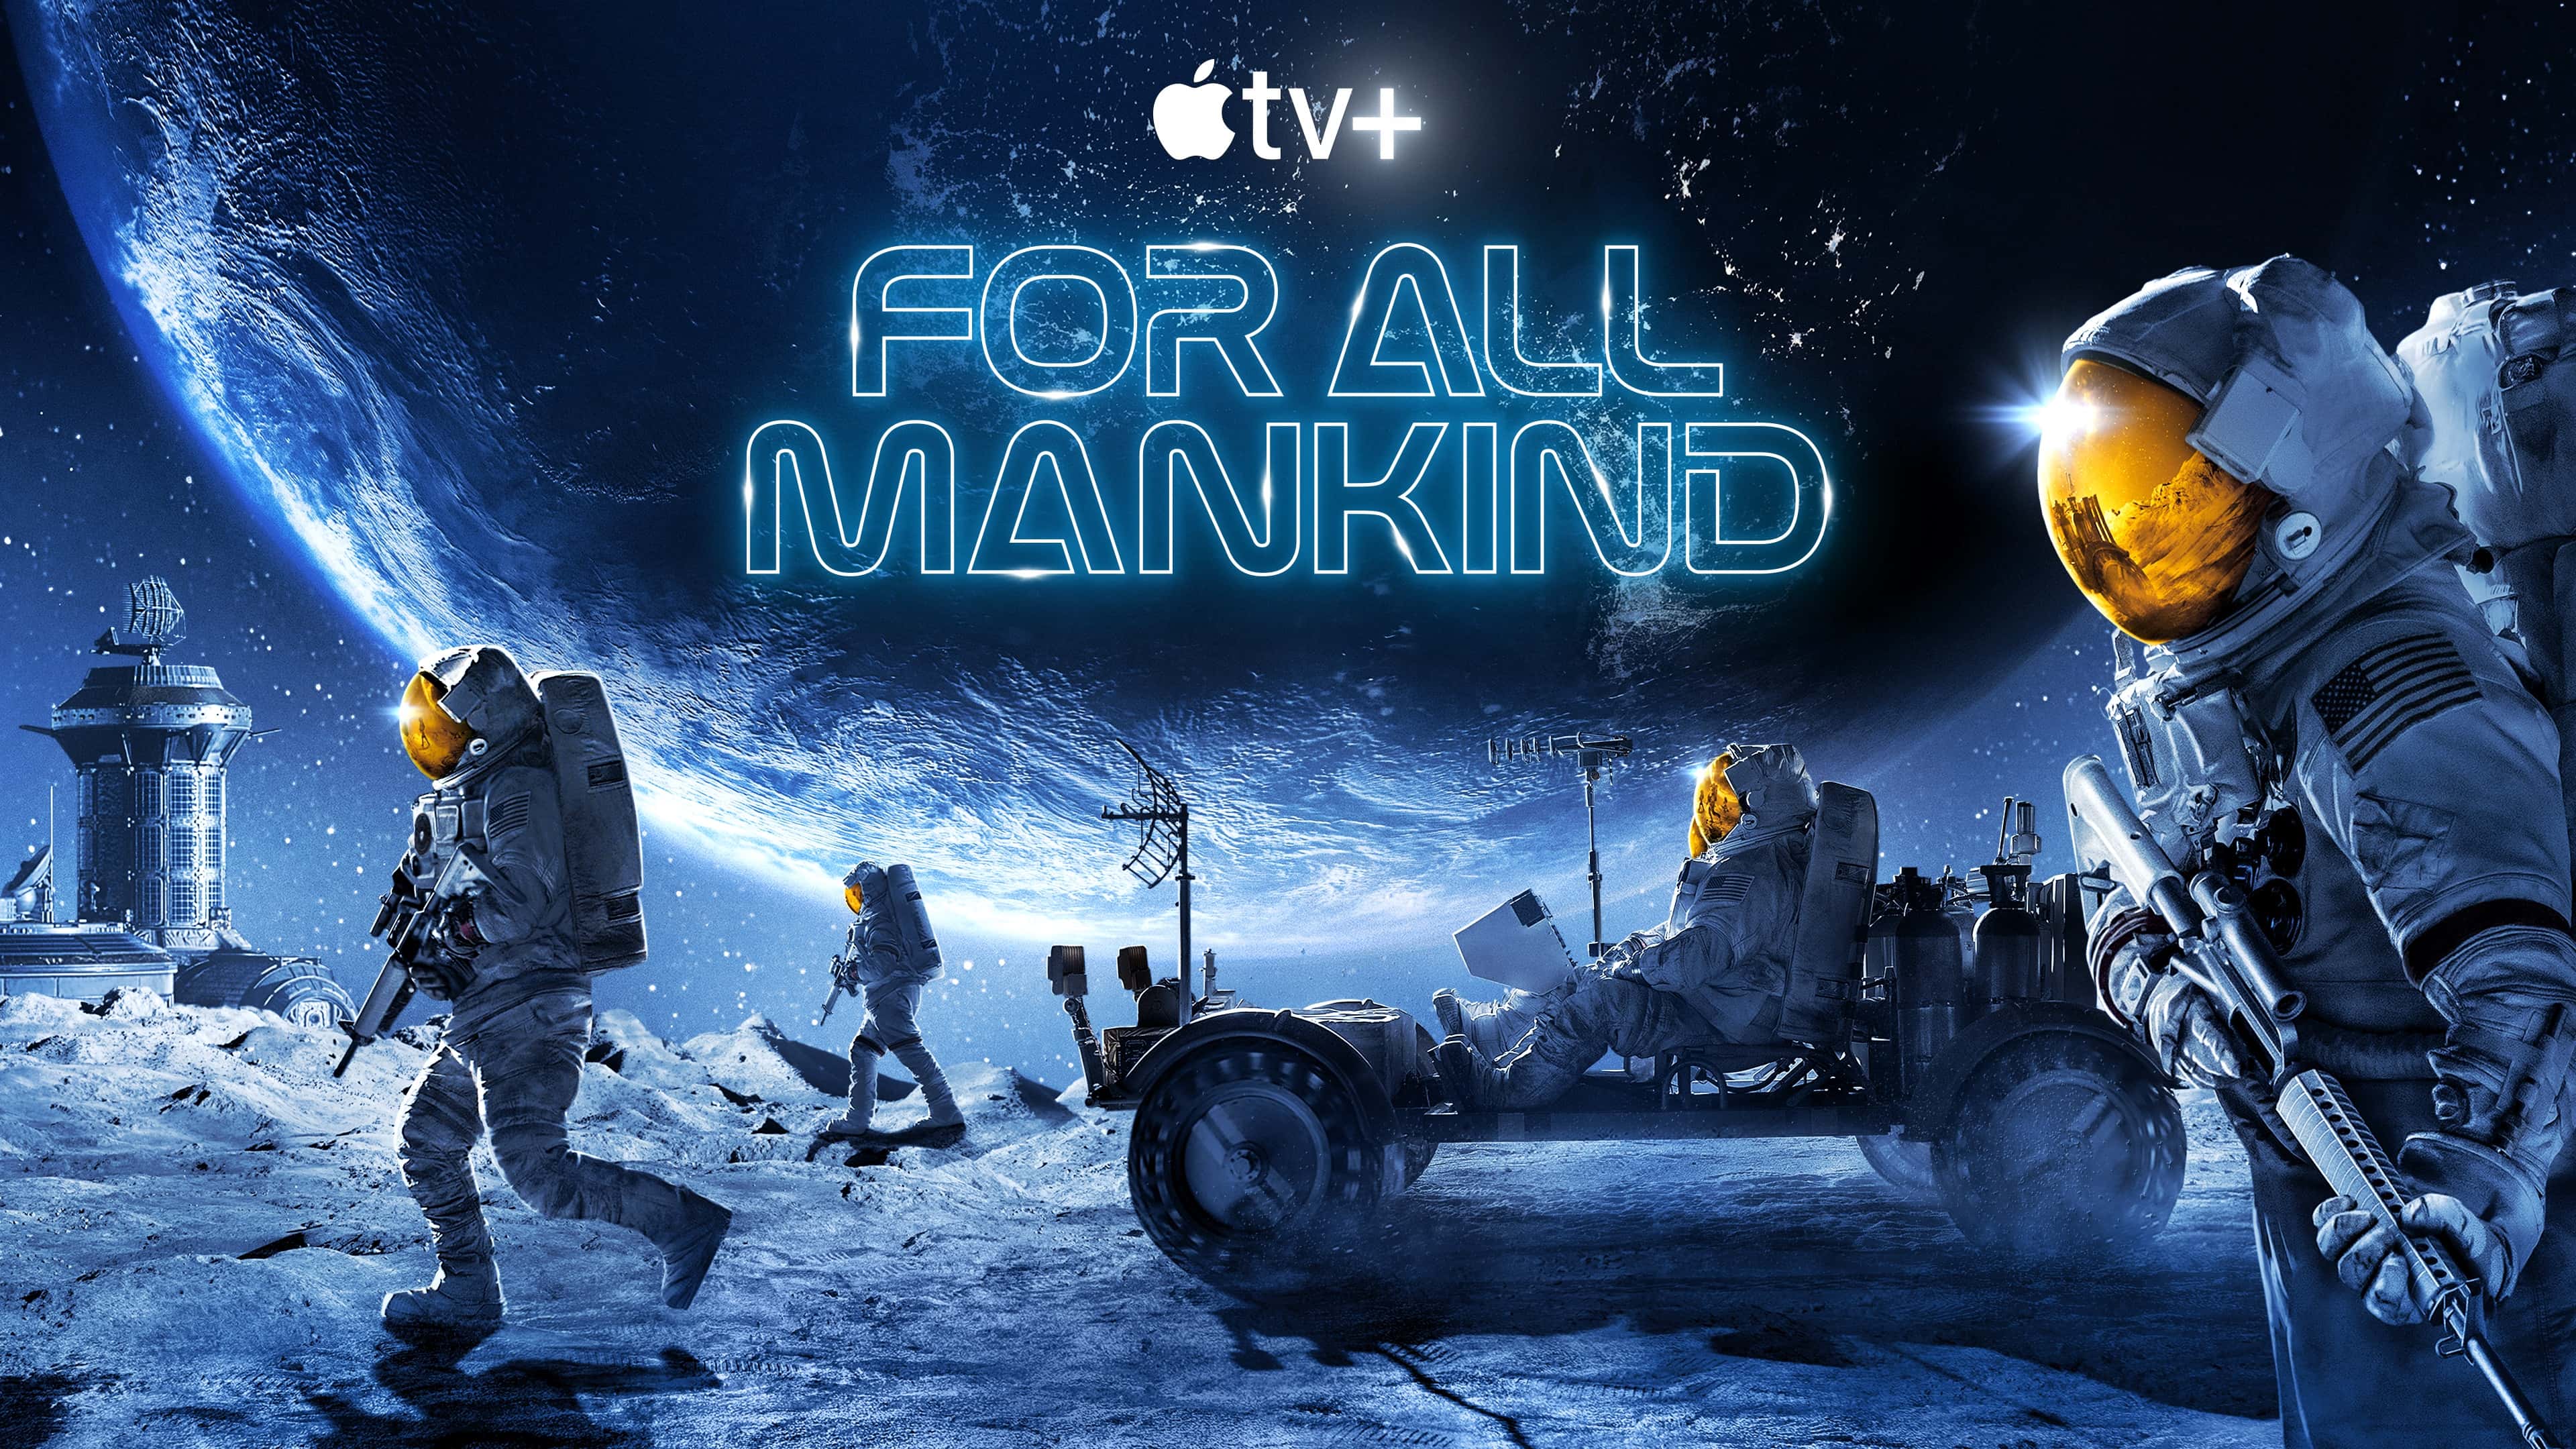 'For All Mankind' review: Season 2 brings more of the same on Apple TV+